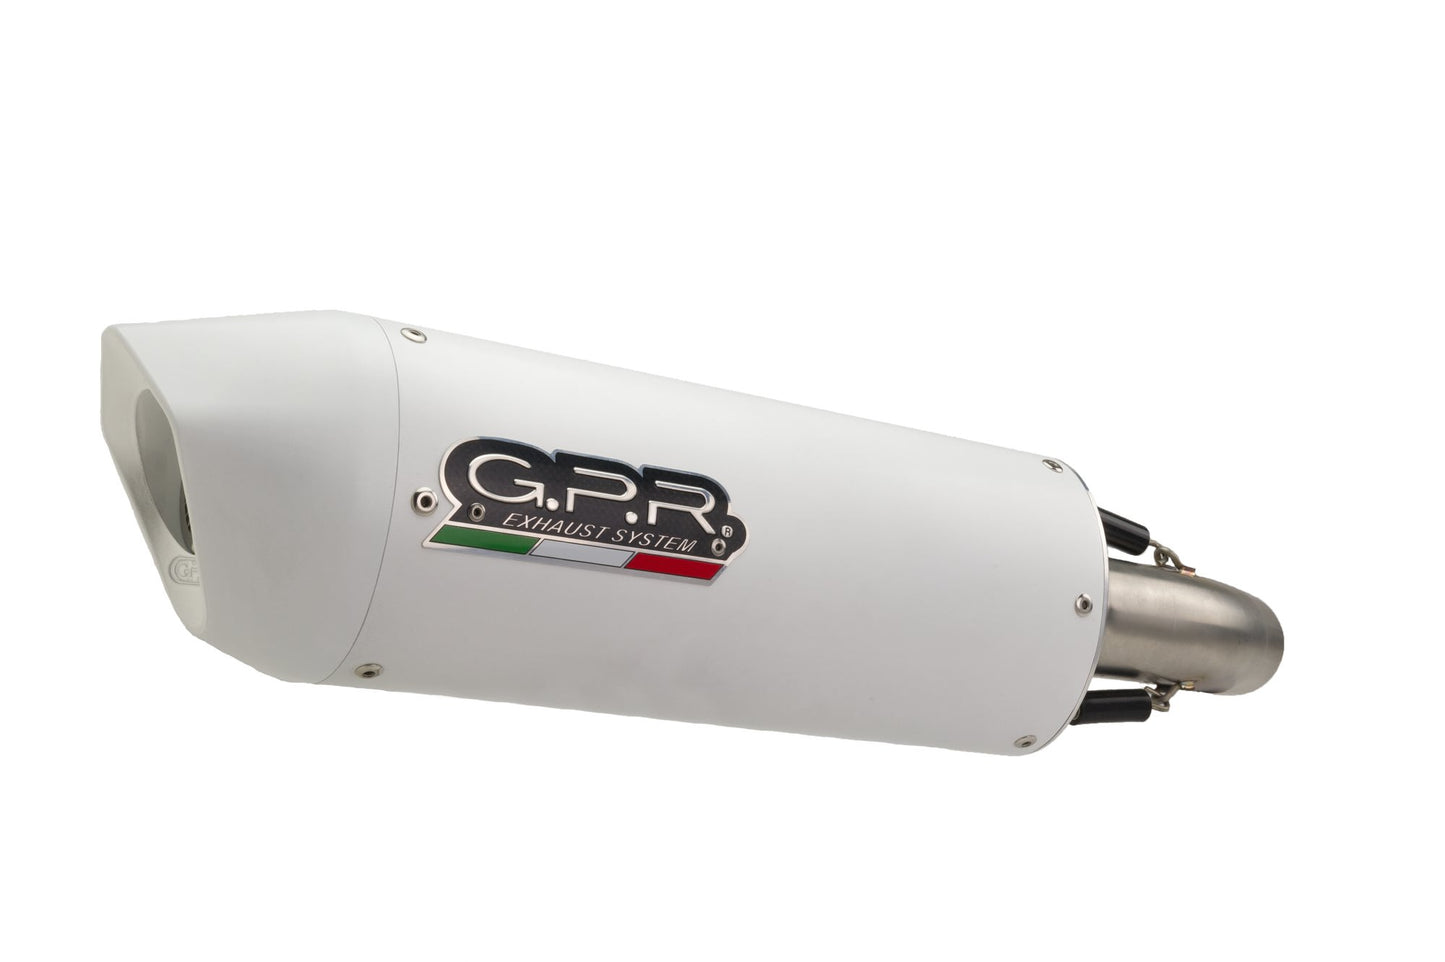 GPR Exhaust for Bmw R1200GS - Adventure 2004-2009, Albus Ceramic, Slip-on Exhaust Including Removable DB Killer and Link Pipe